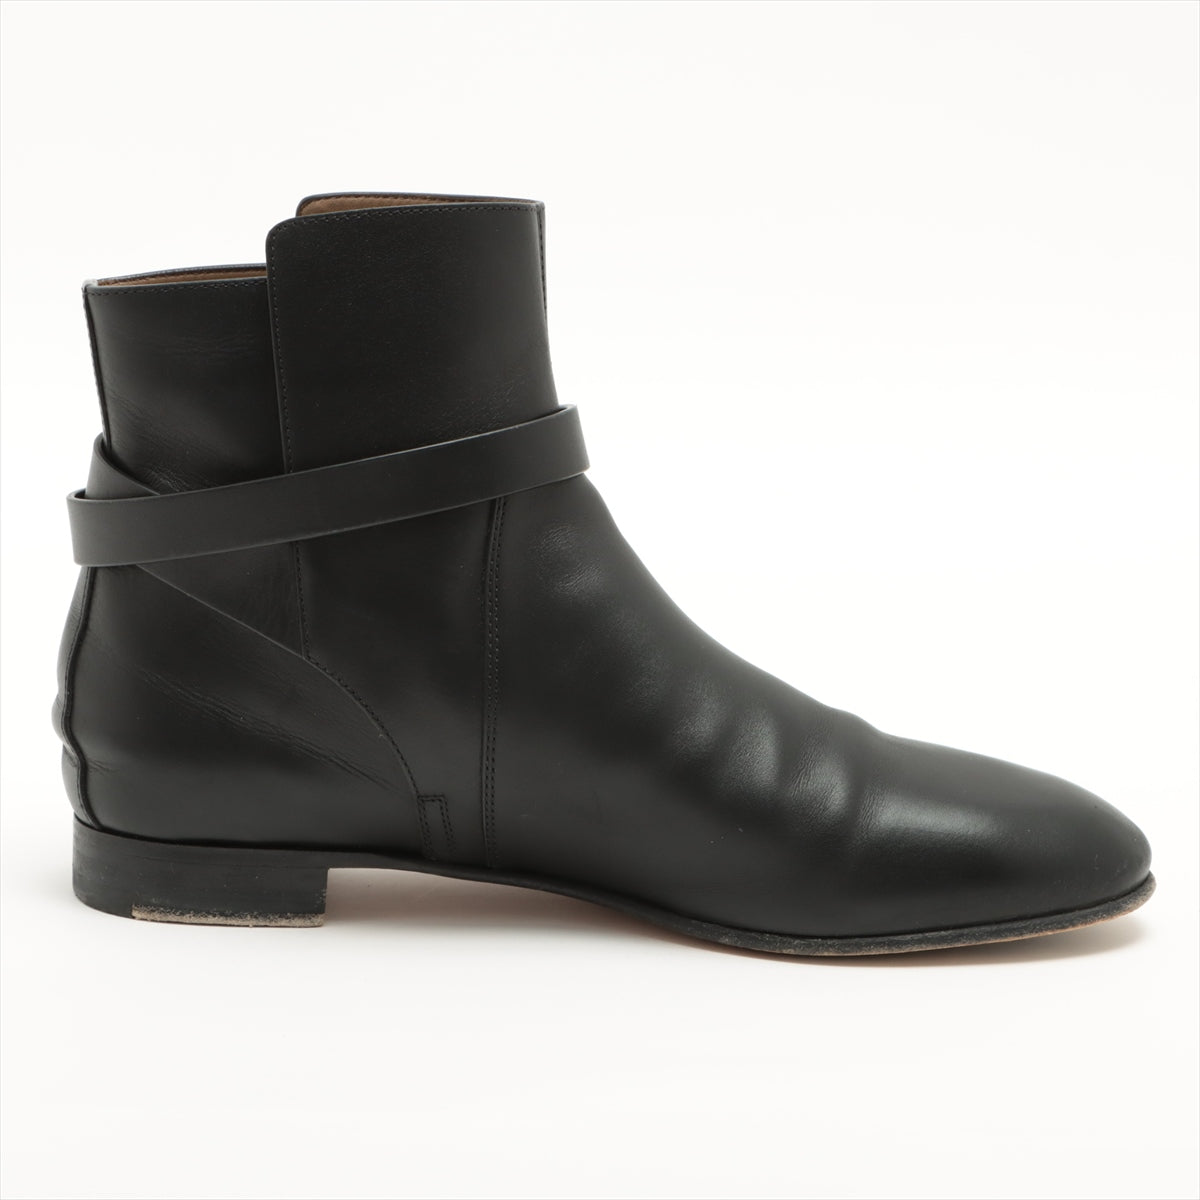 Hermès Neo Leather Short Boots 41 Ladies' Black CV162133Z2209 box There is a bag Kelly metal fittings